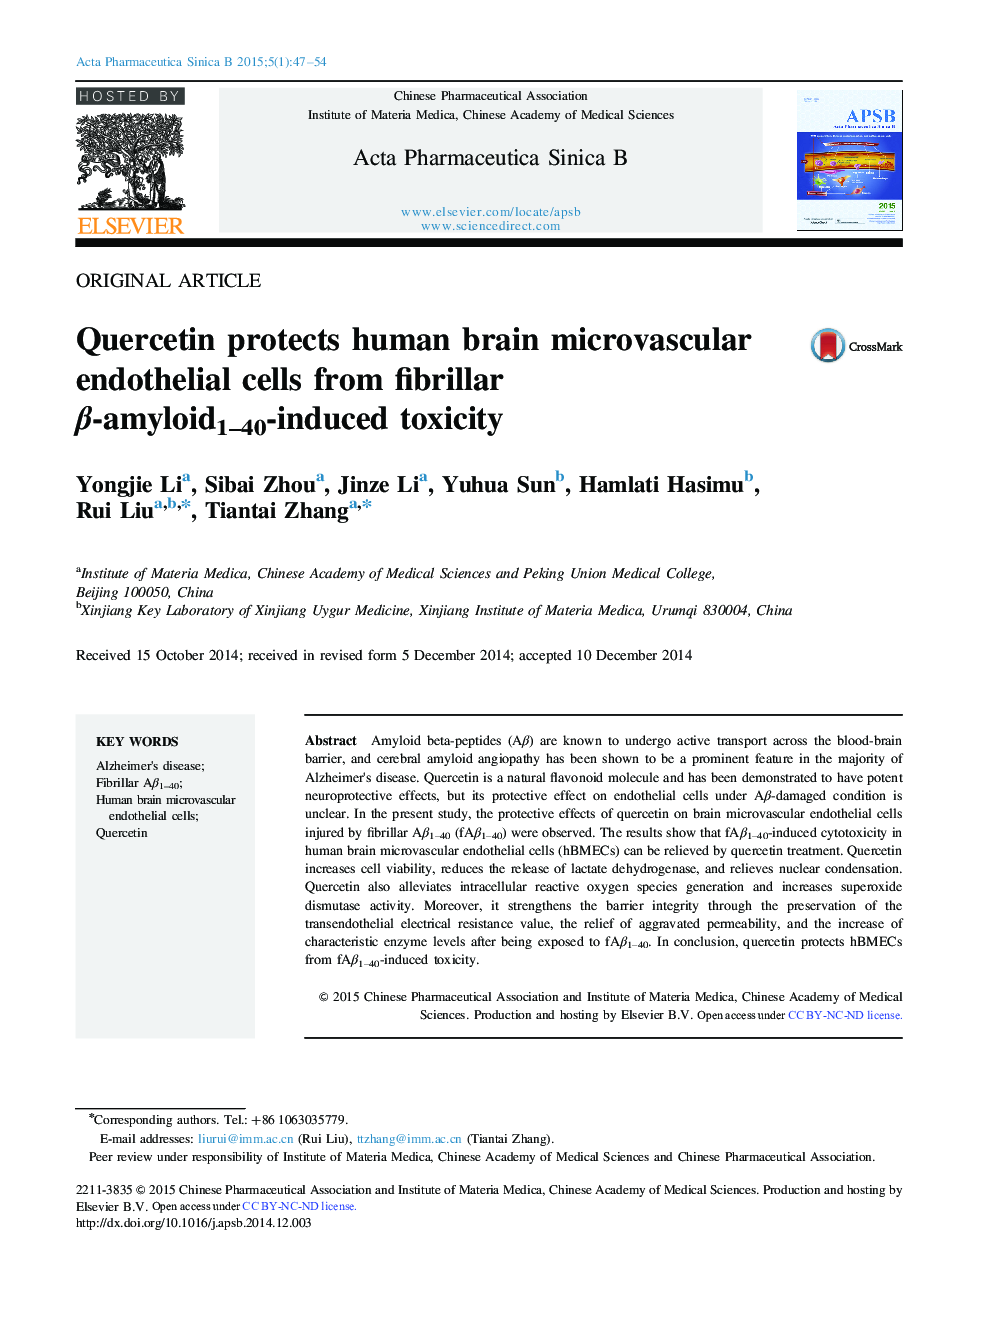 Quercetin protects human brain microvascular endothelial cells from fibrillar β-amyloid1–40-induced toxicity 